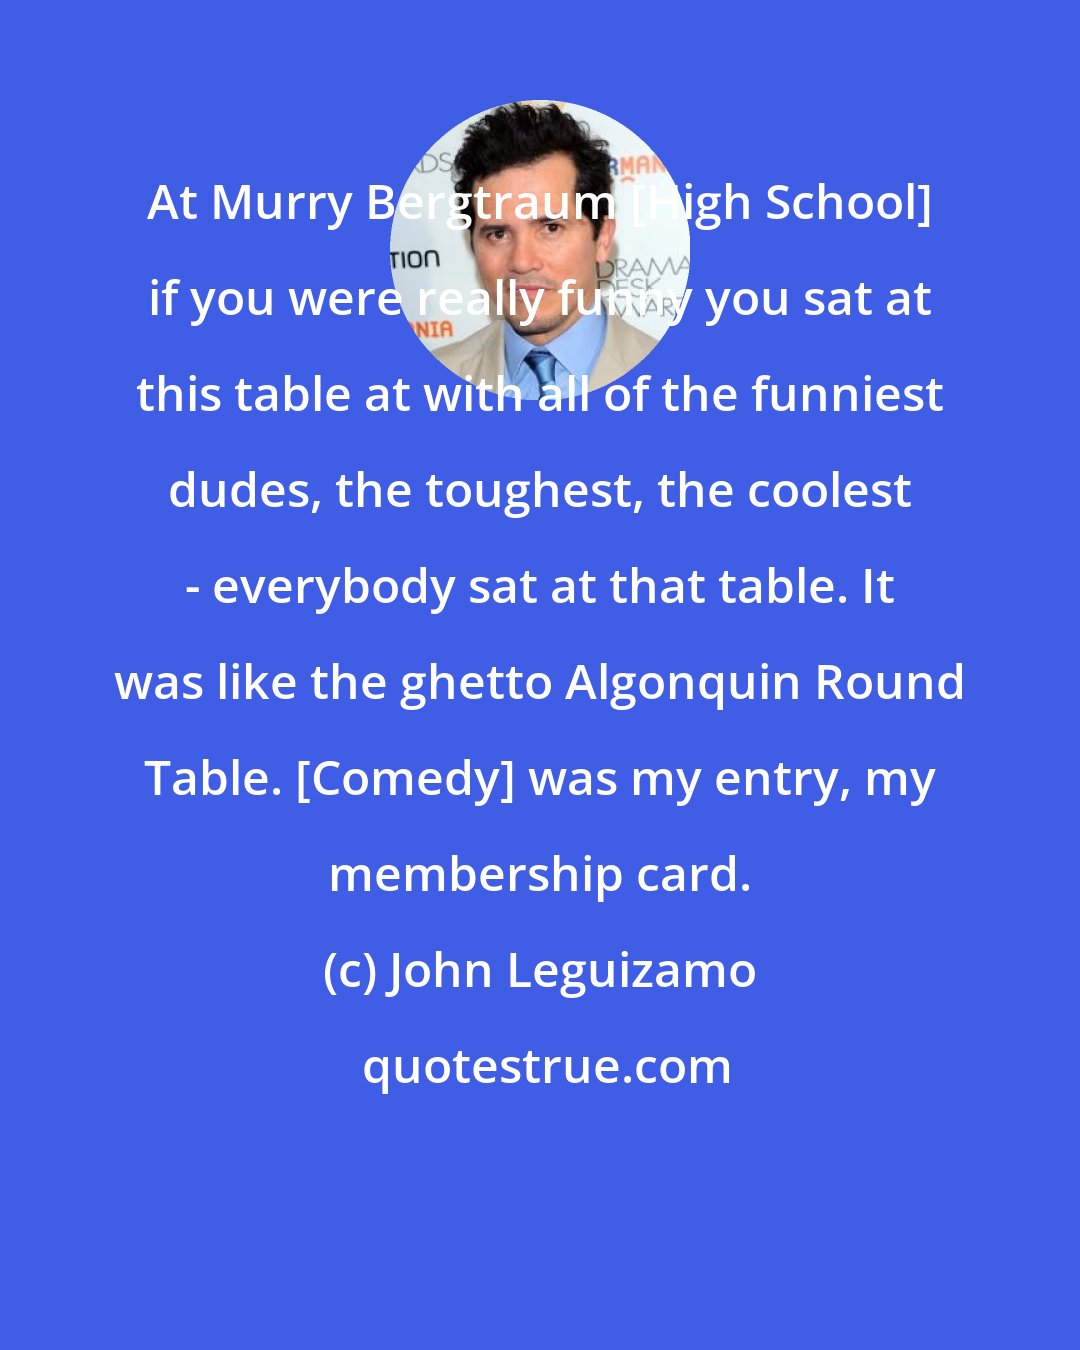 John Leguizamo: At Murry Bergtraum [High School] if you were really funny you sat at this table at with all of the funniest dudes, the toughest, the coolest - everybody sat at that table. It was like the ghetto Algonquin Round Table. [Comedy] was my entry, my membership card.